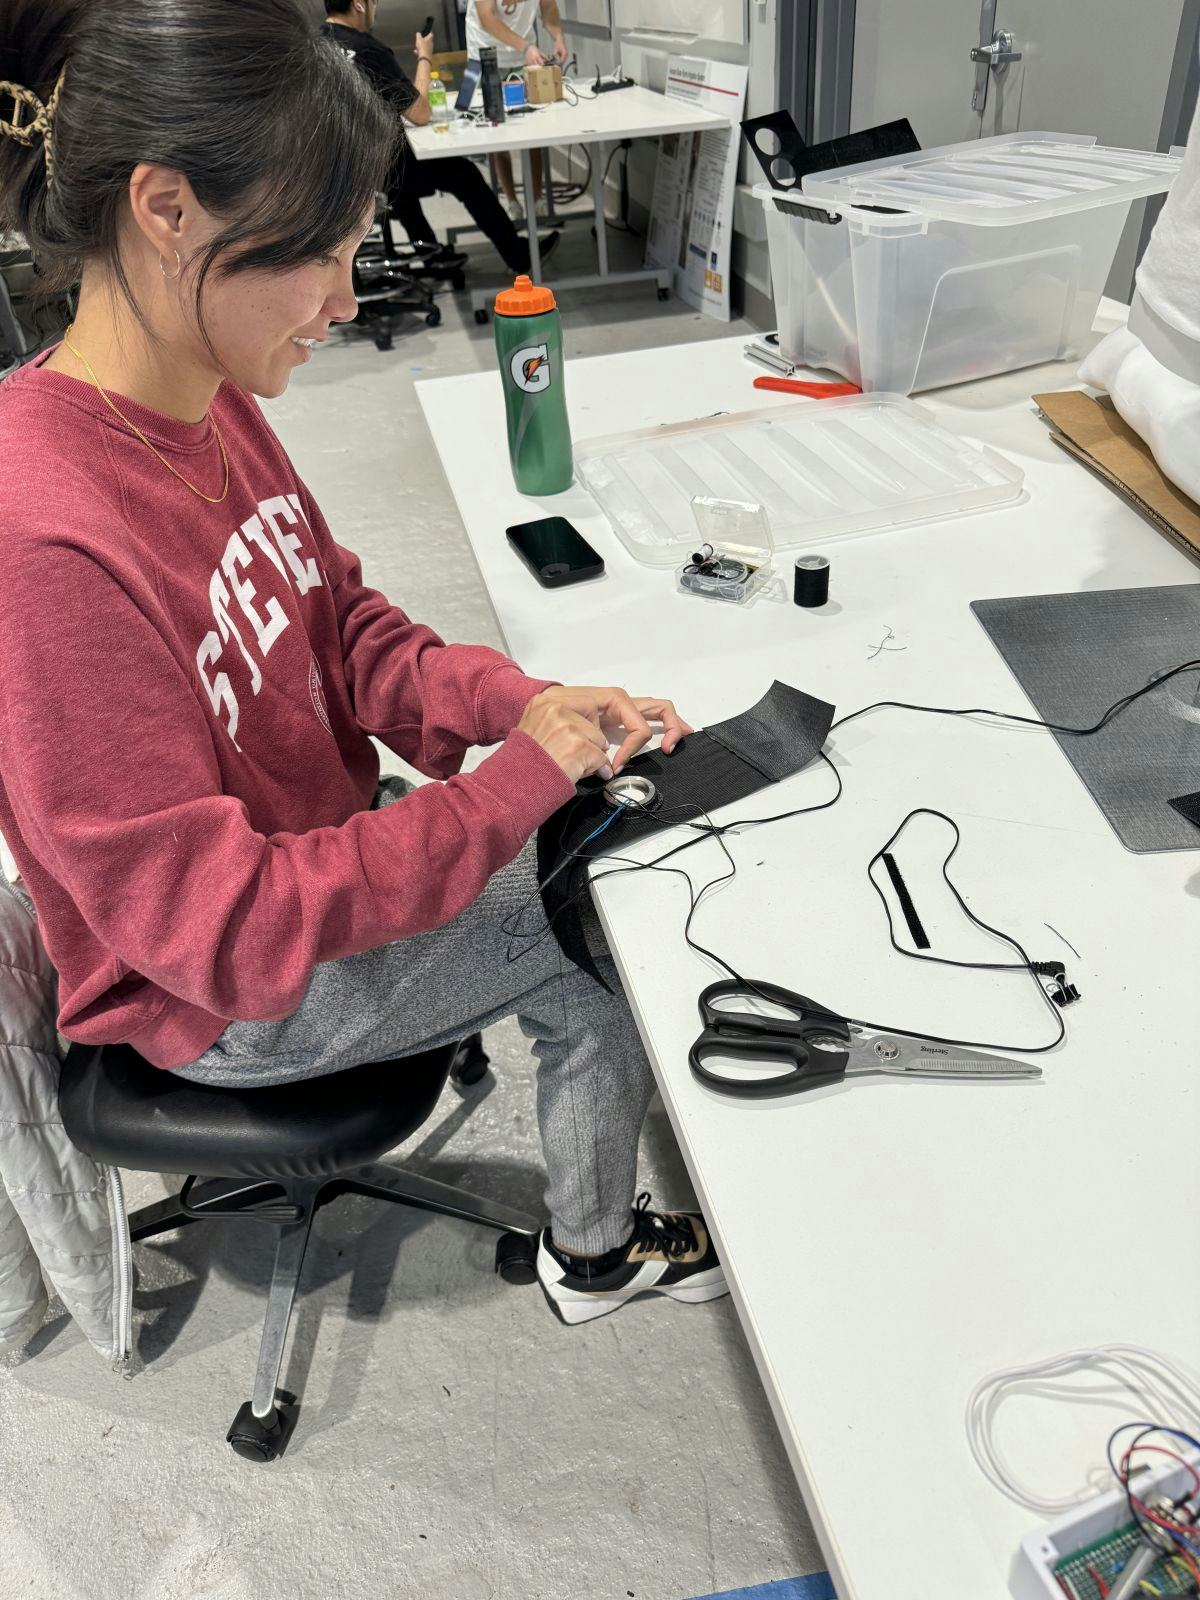 A female student in a red Stevens sweatshirt sits at a table in a lab with a pair of scissors next to her. In her hands she is working on assembling the Medflex device.